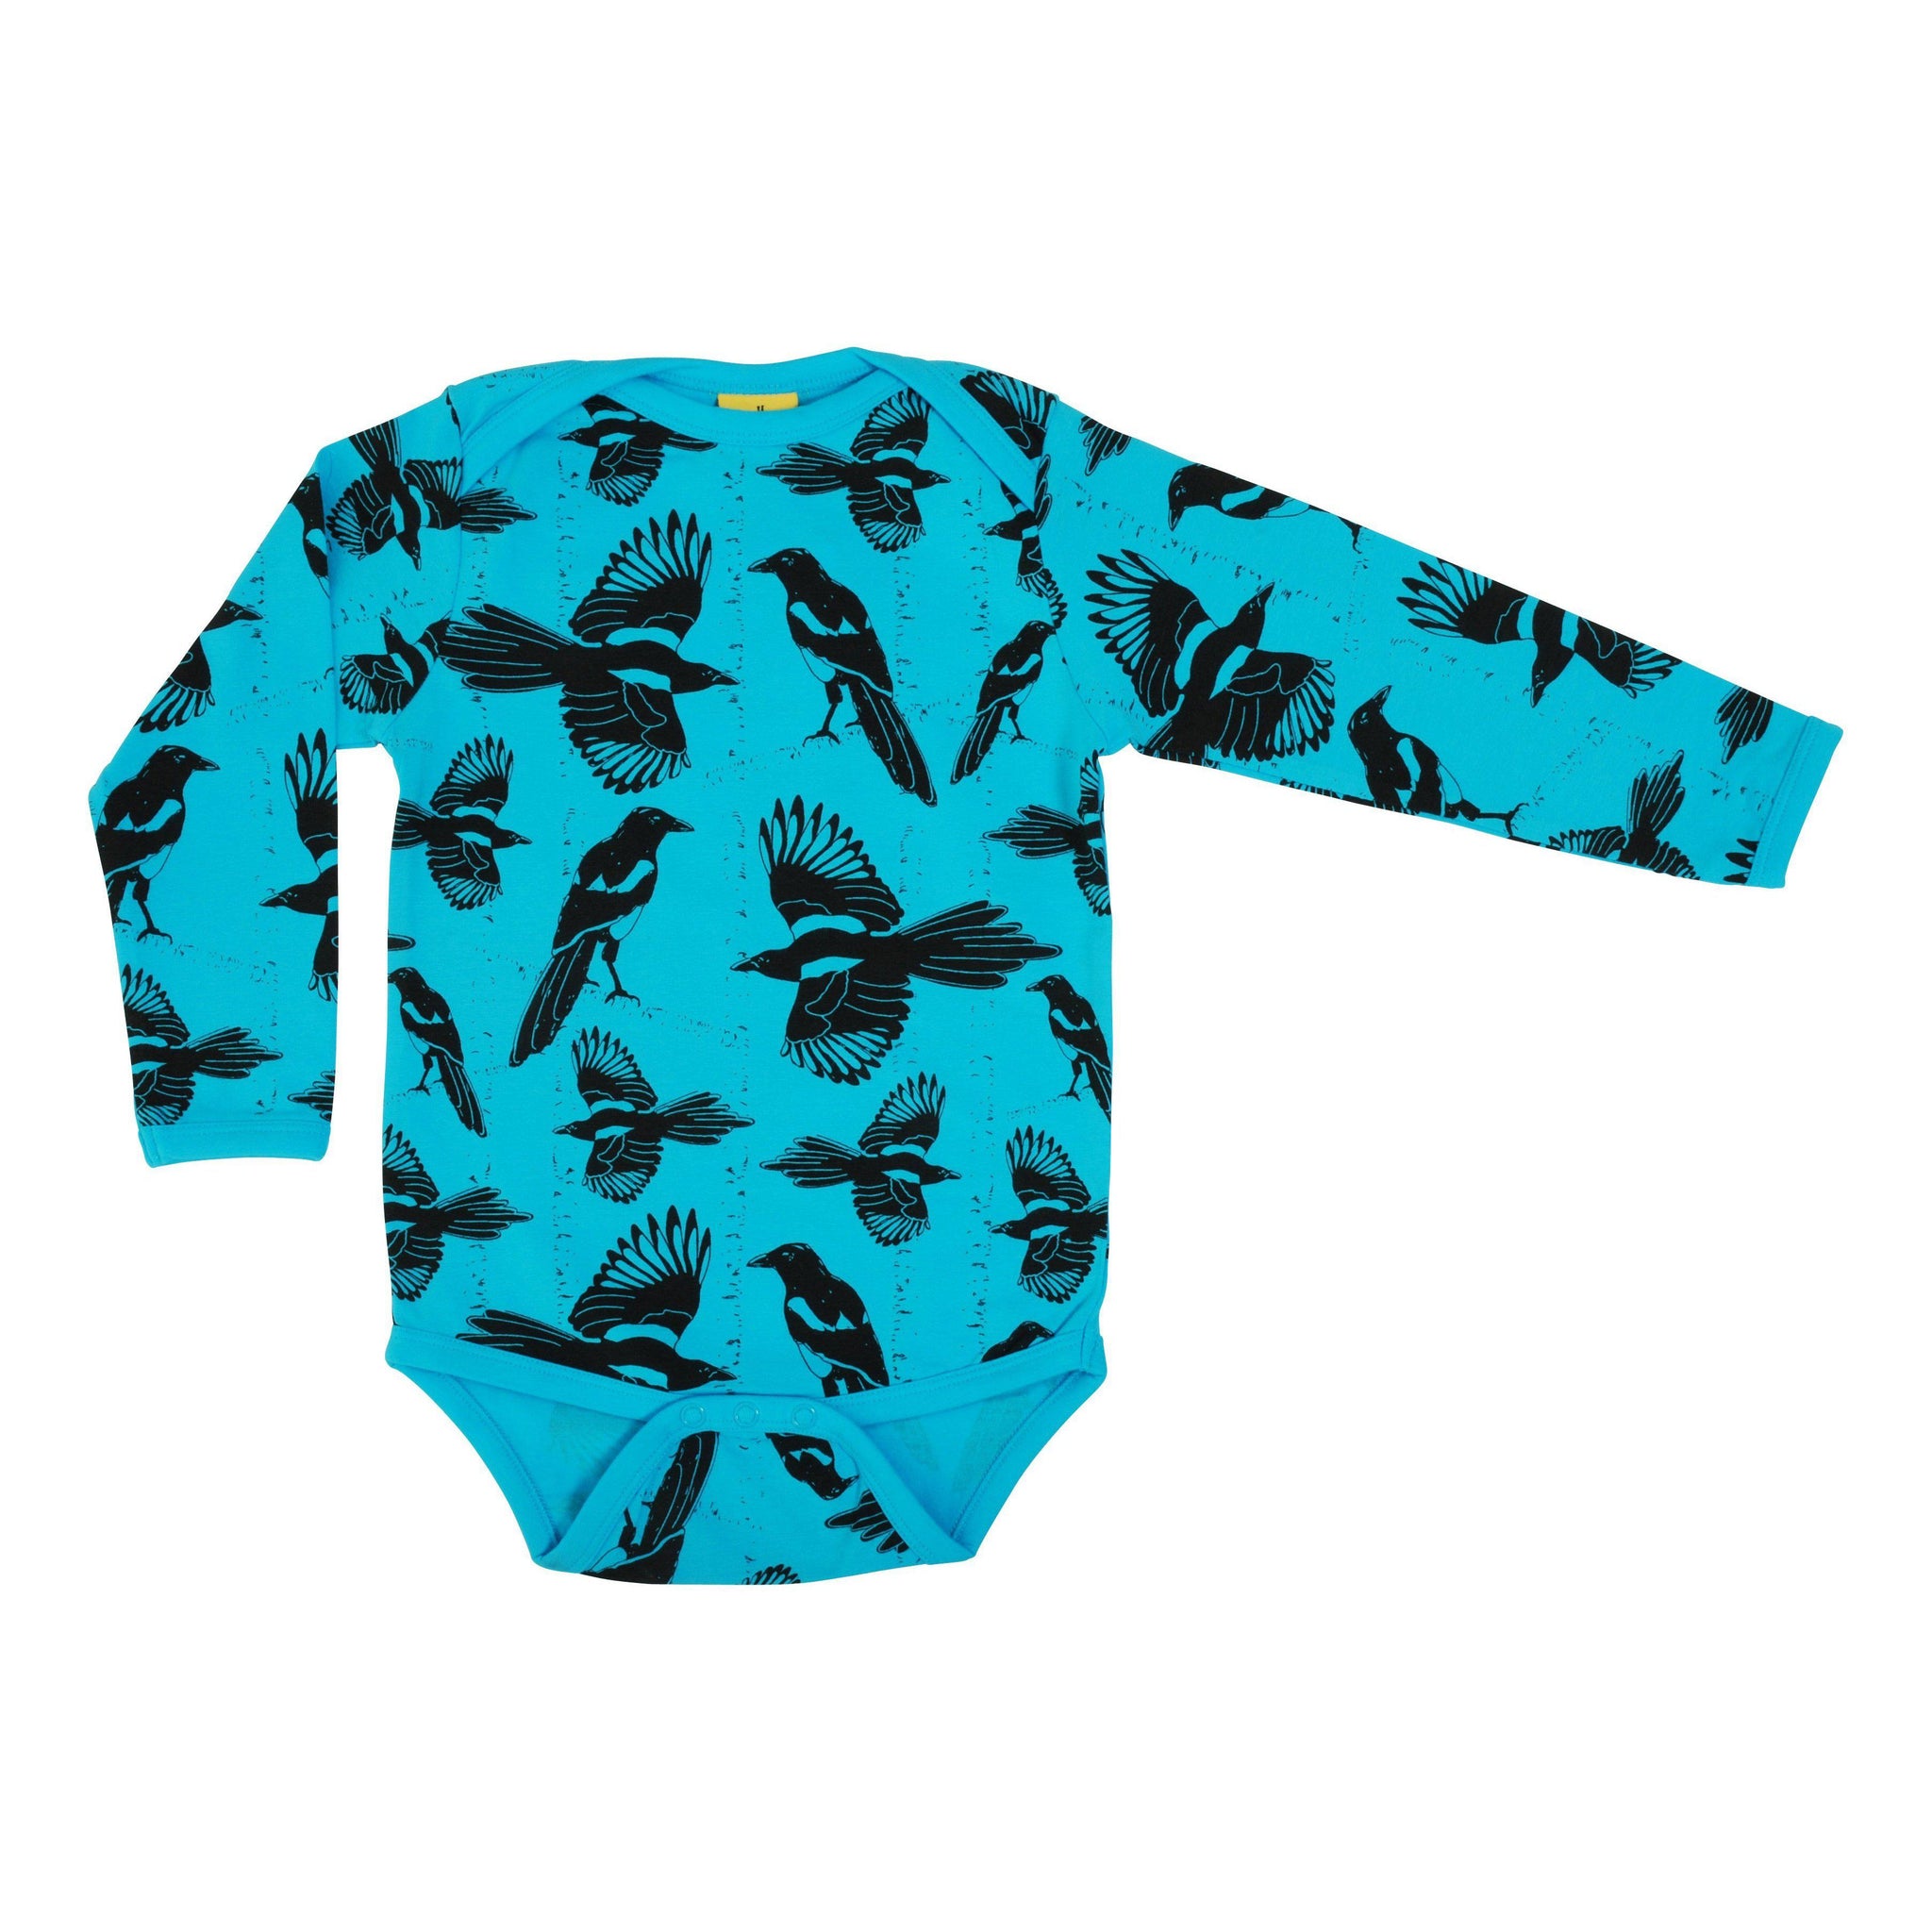 More than a Fling - Pica Pica Long Sleeved Body Top (Blue Atoll)